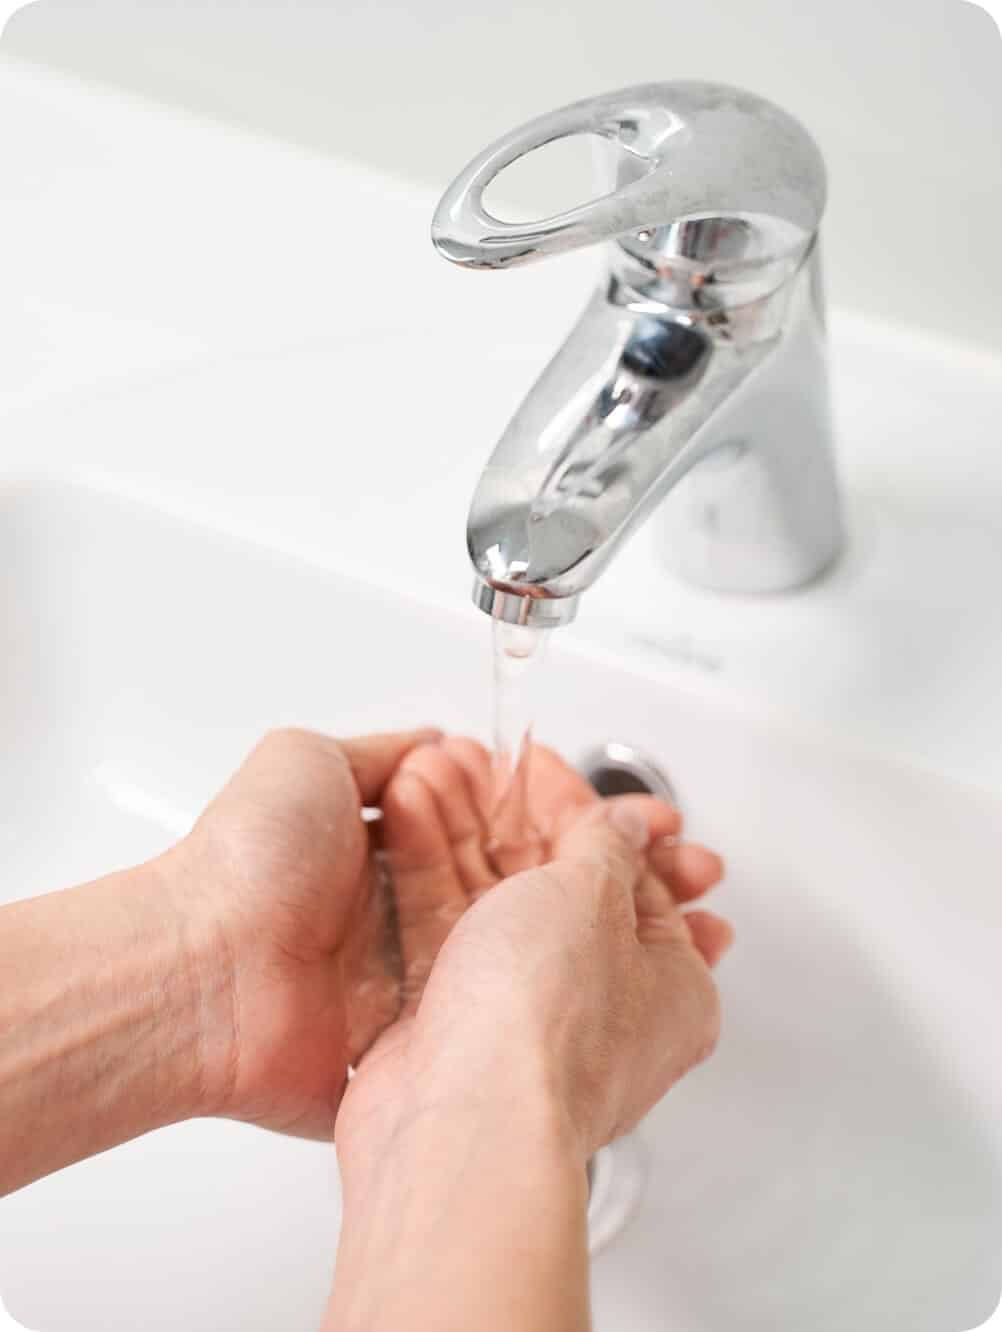 Plumber in Delaware checking water flow after installing faucet | Delaware Plumbing Services | Call Harris Now